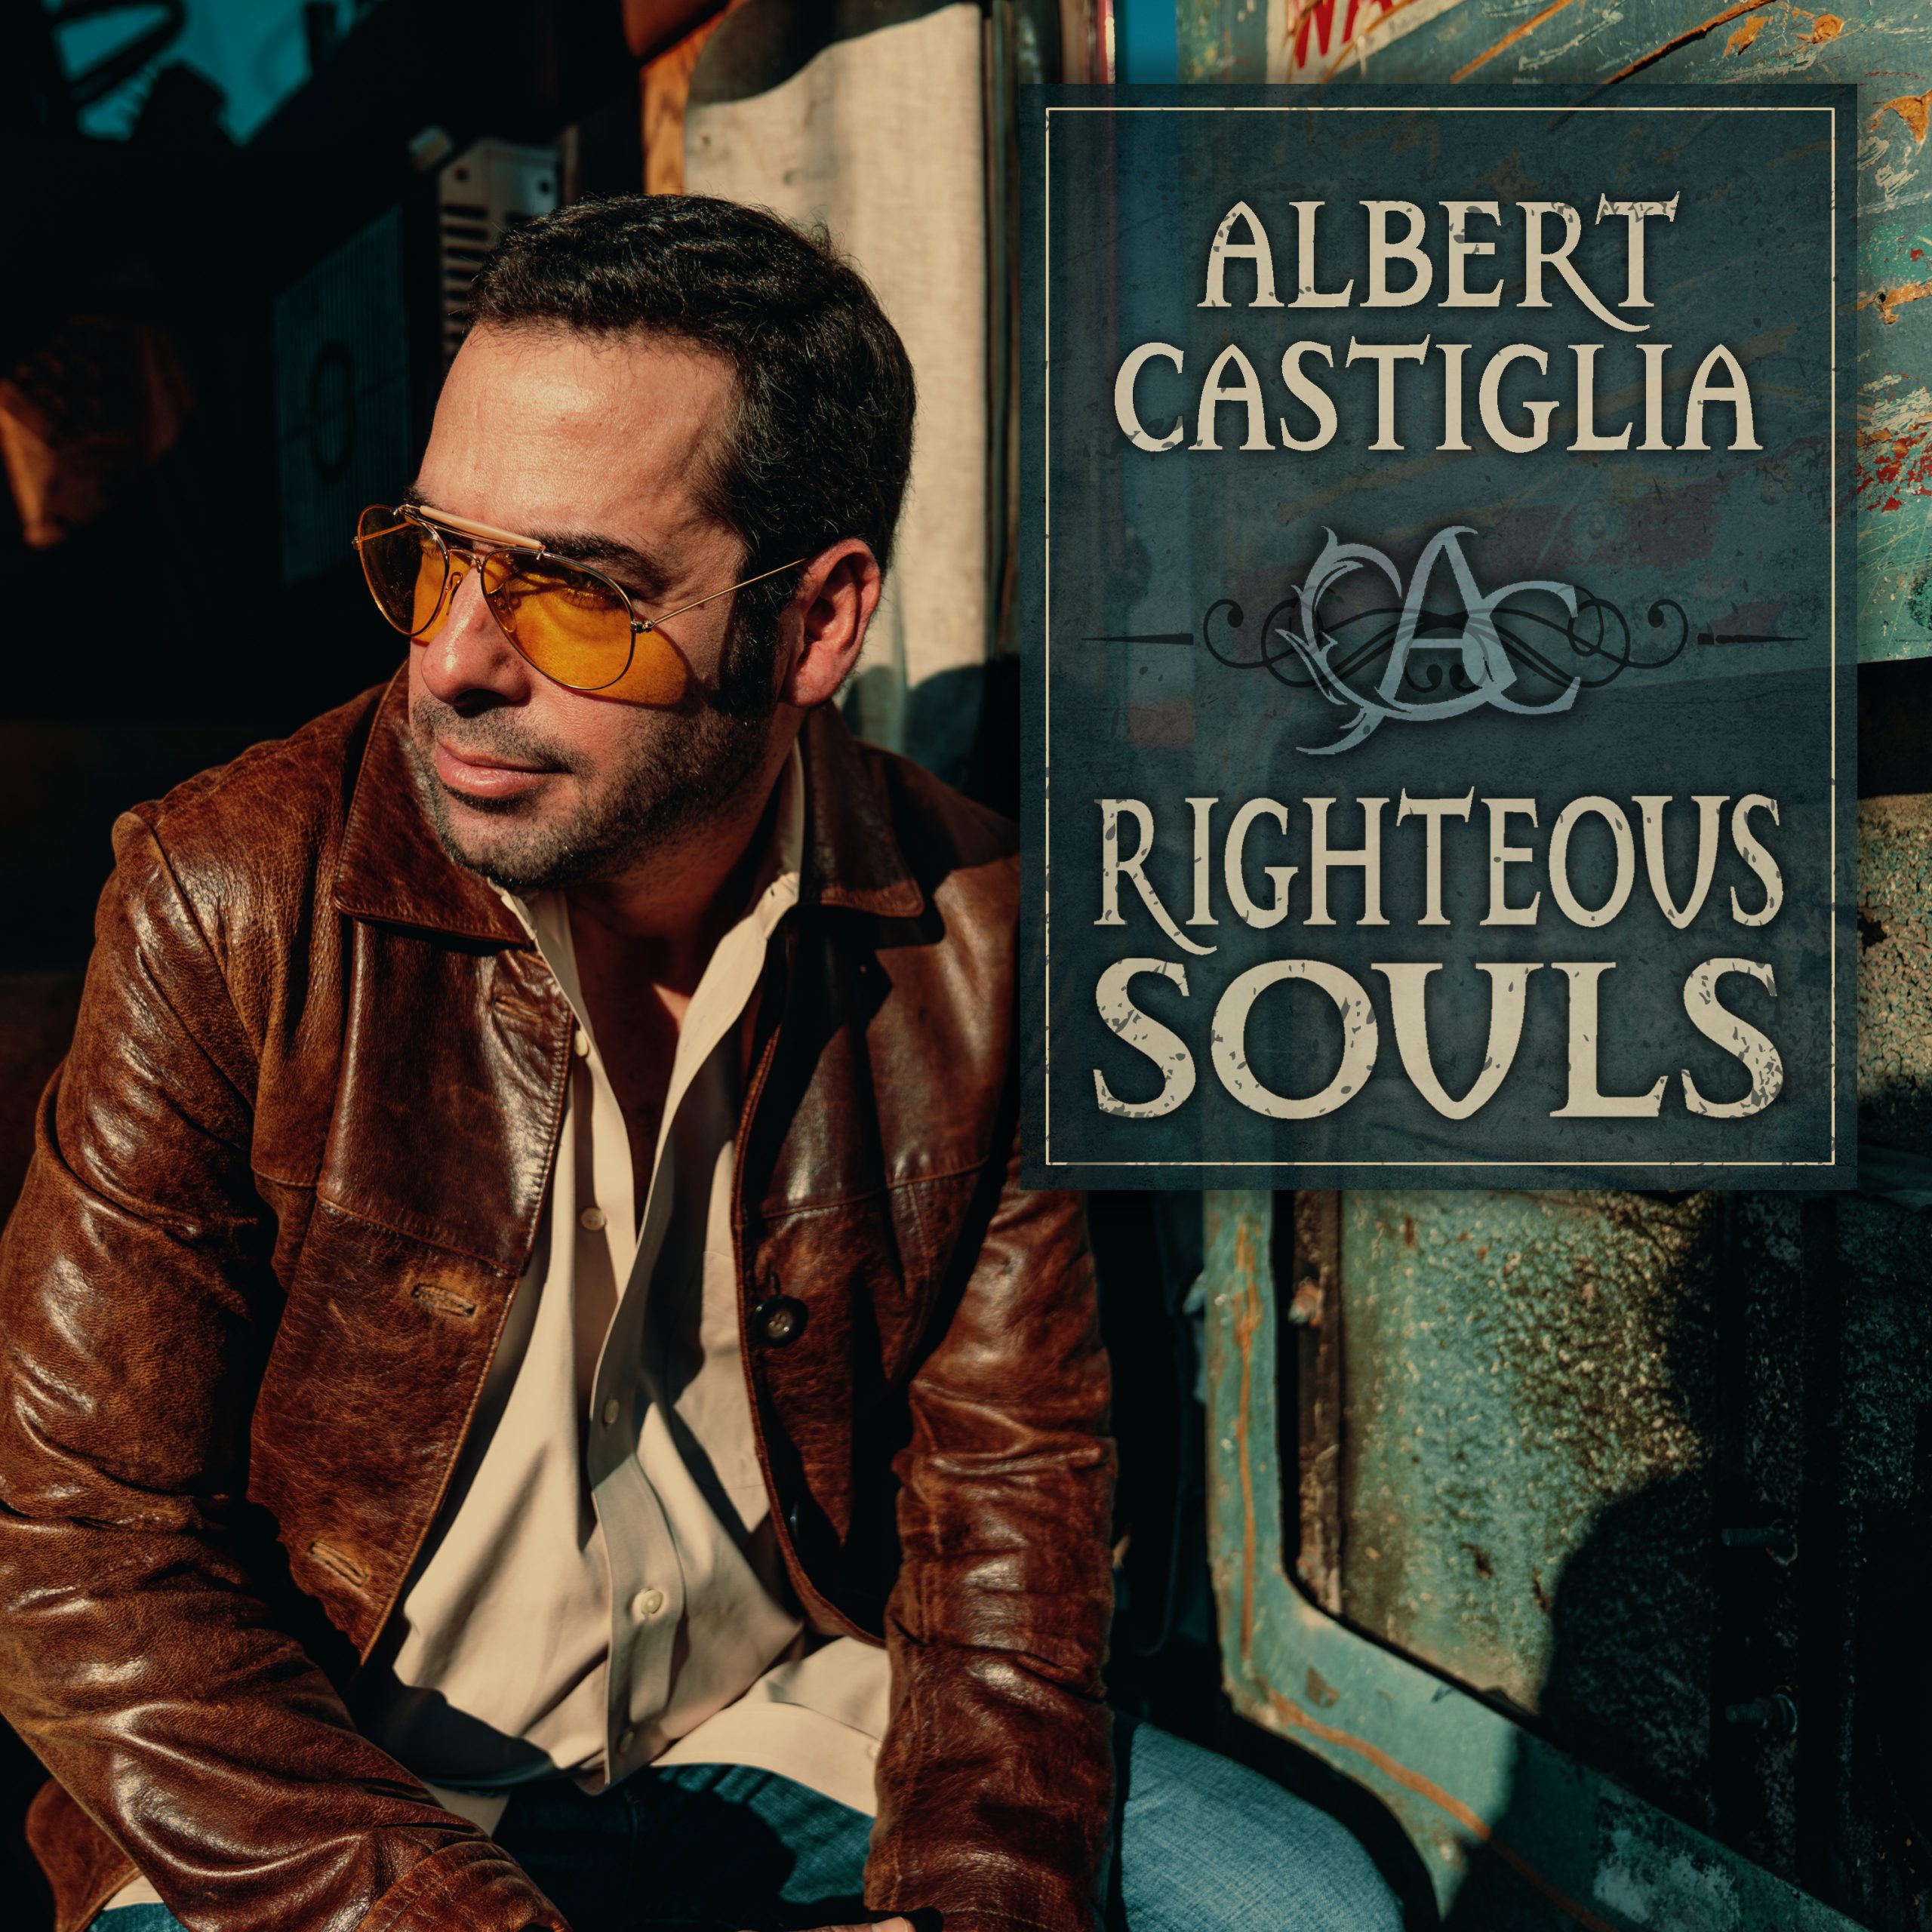 Albert Castiglia Assembles All-Star Cast of "Righteous Souls" on His New Gulf Coast Record Album, Set for July 19th Release Date